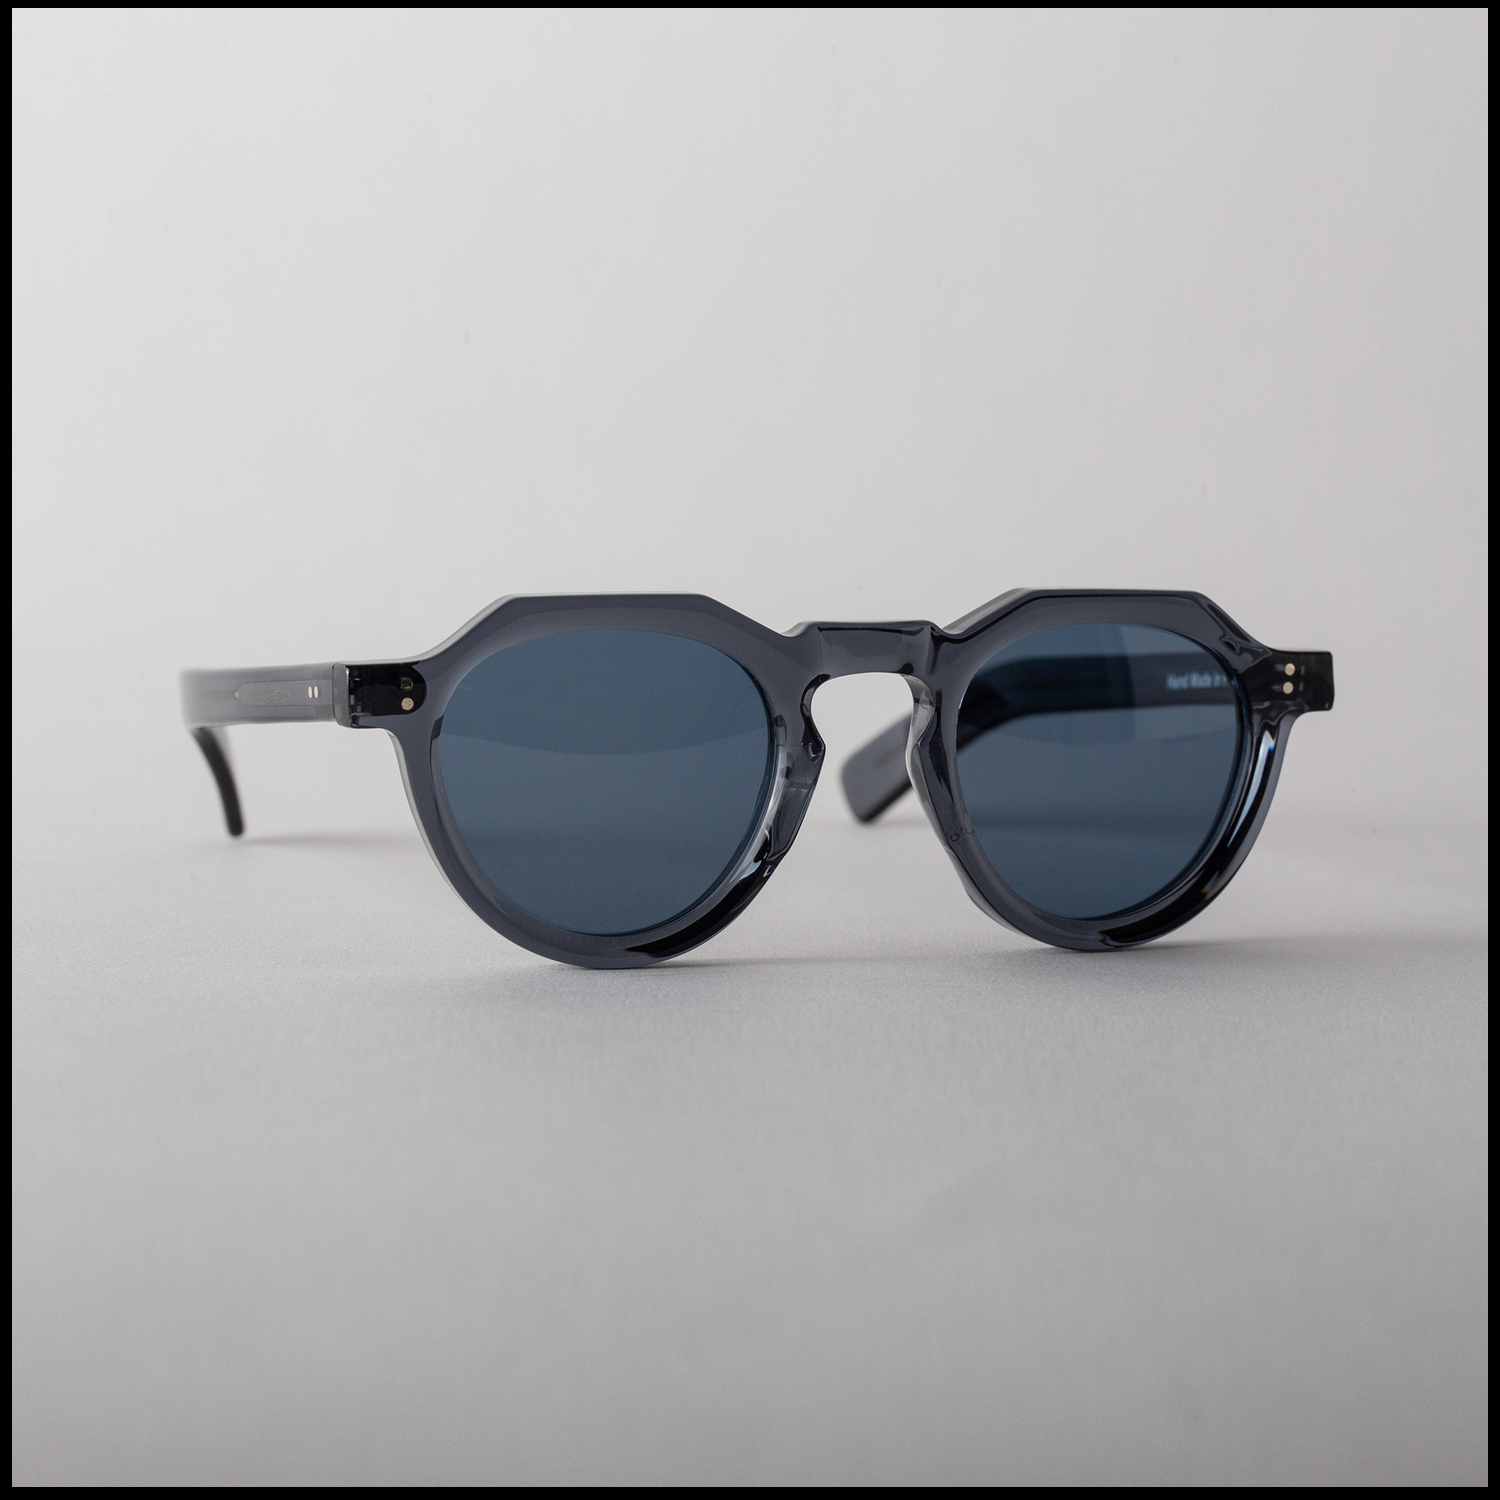 Sunglasses MOD.01 in Midnight color by Arpenteur